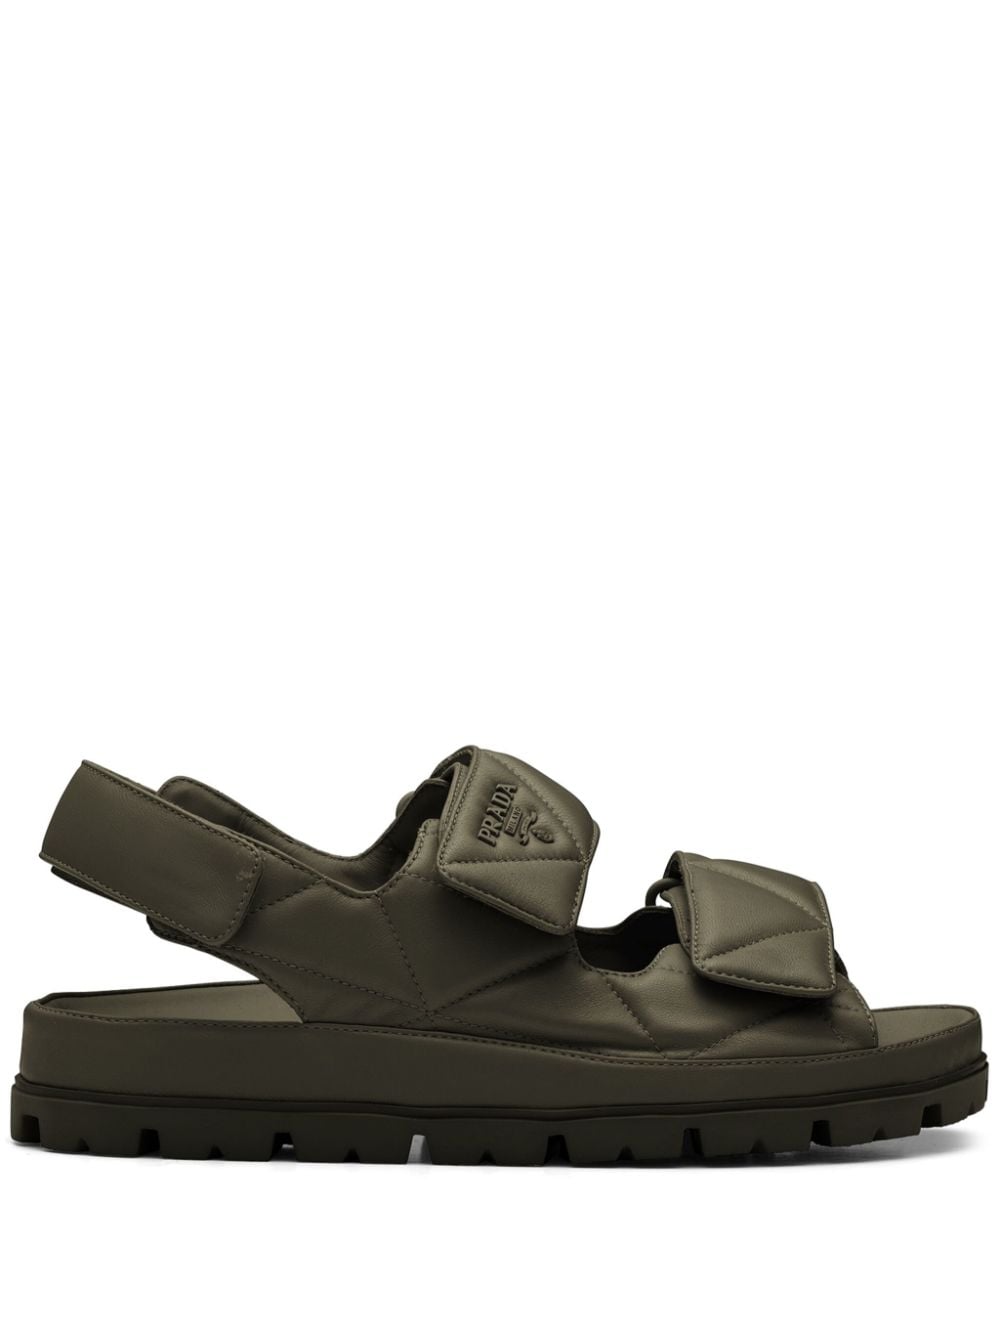 Prada Padded Nappa Leather Sandals In Green